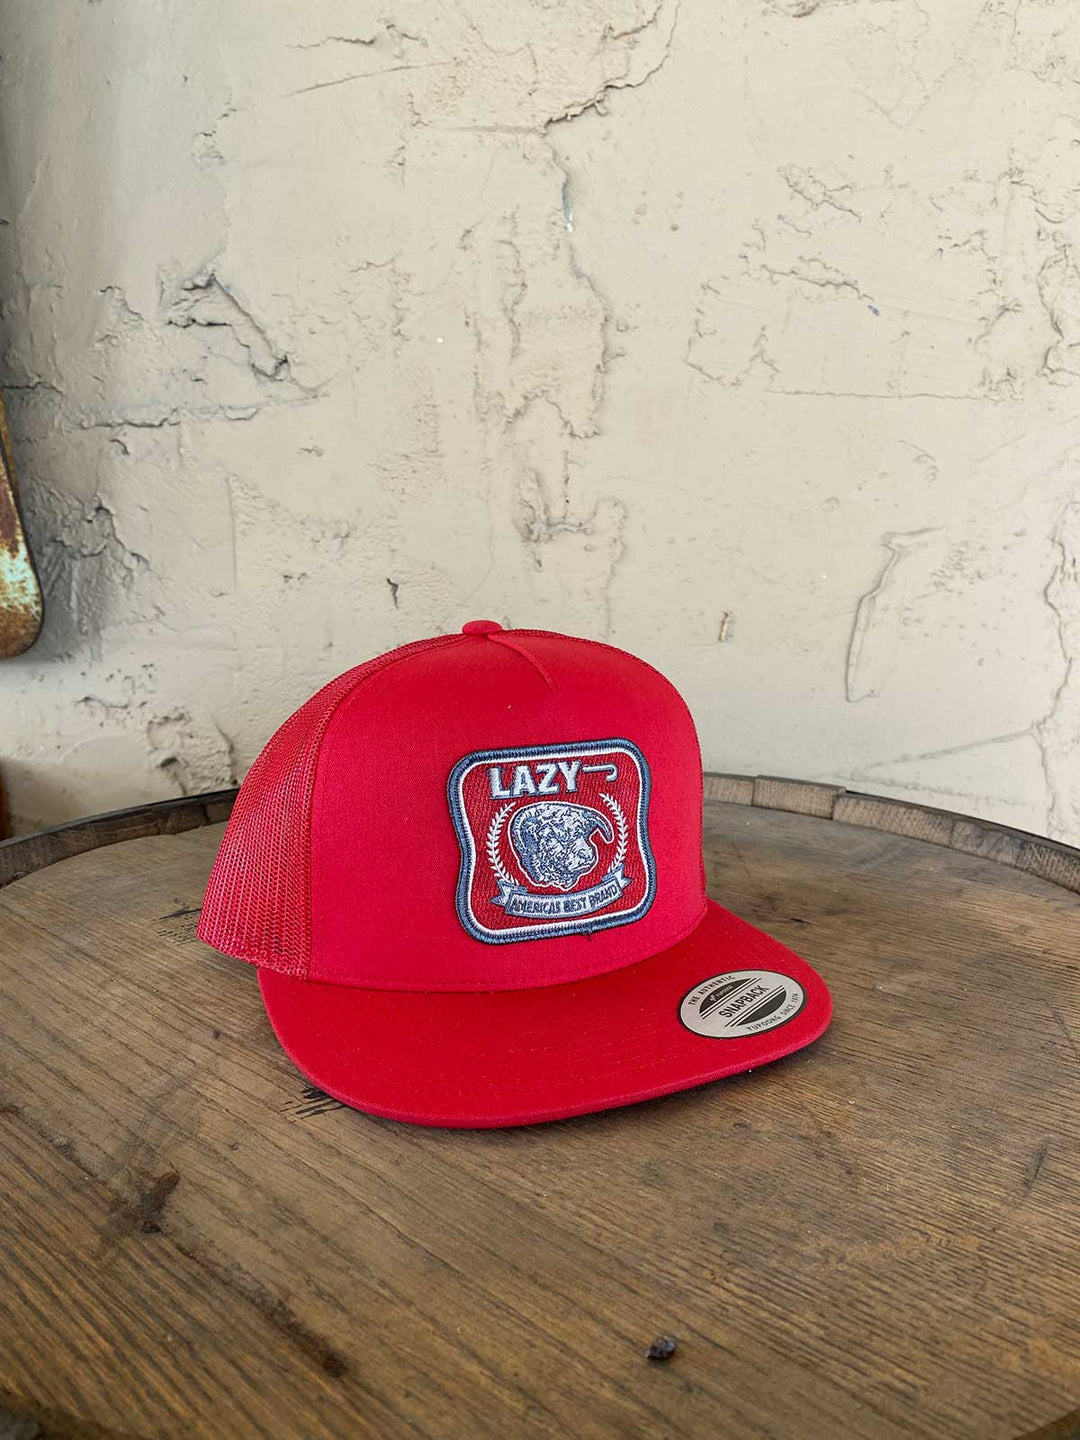 Lazy J Ranch Wear Red & Red 4" America's Best Cap